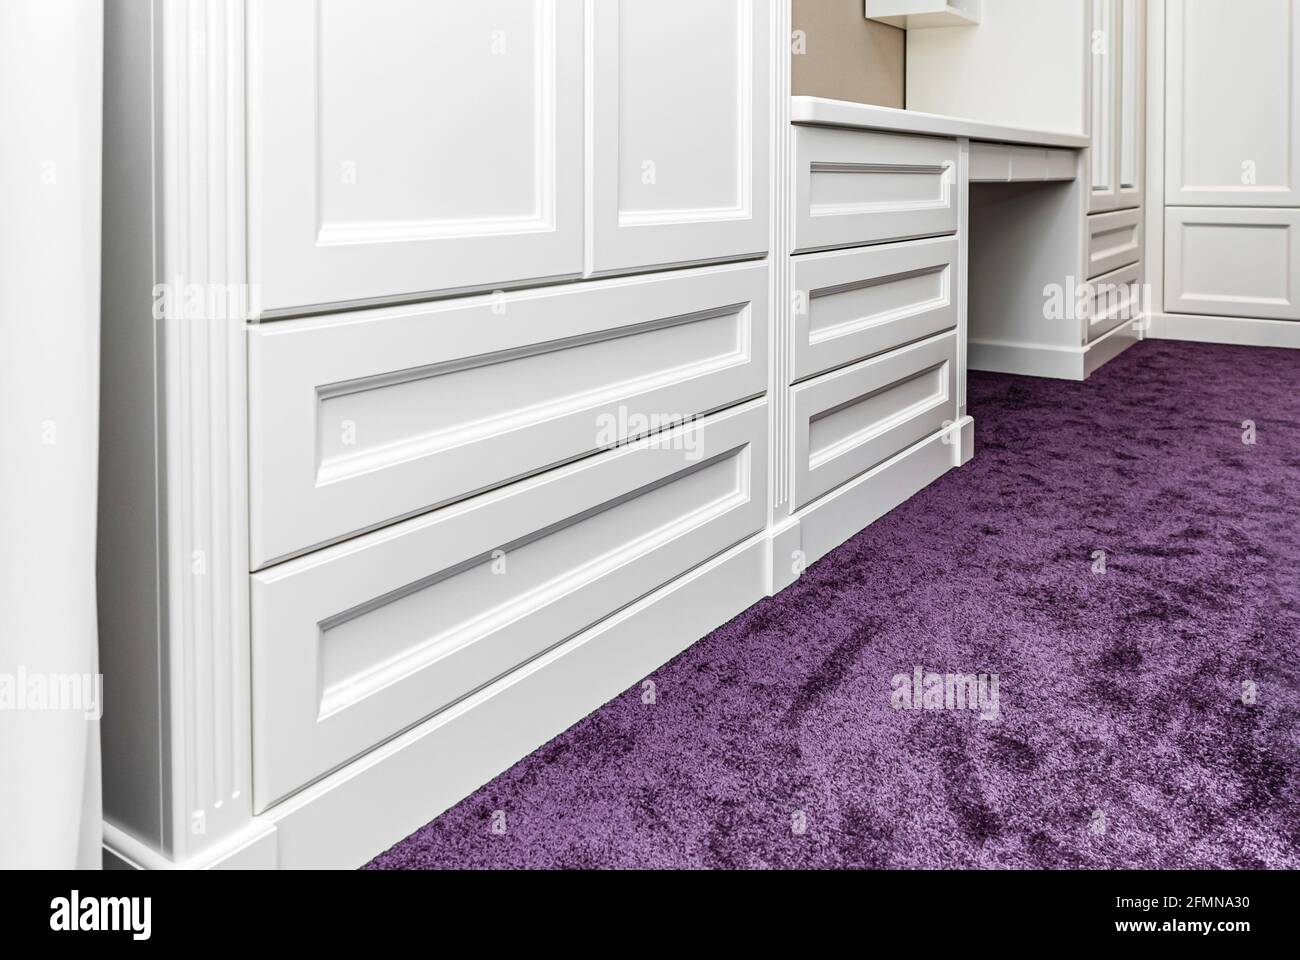 Classical style wardrobe with writing desk and drawers on a bright purple carpet in a bright room low angle view Stock Photo